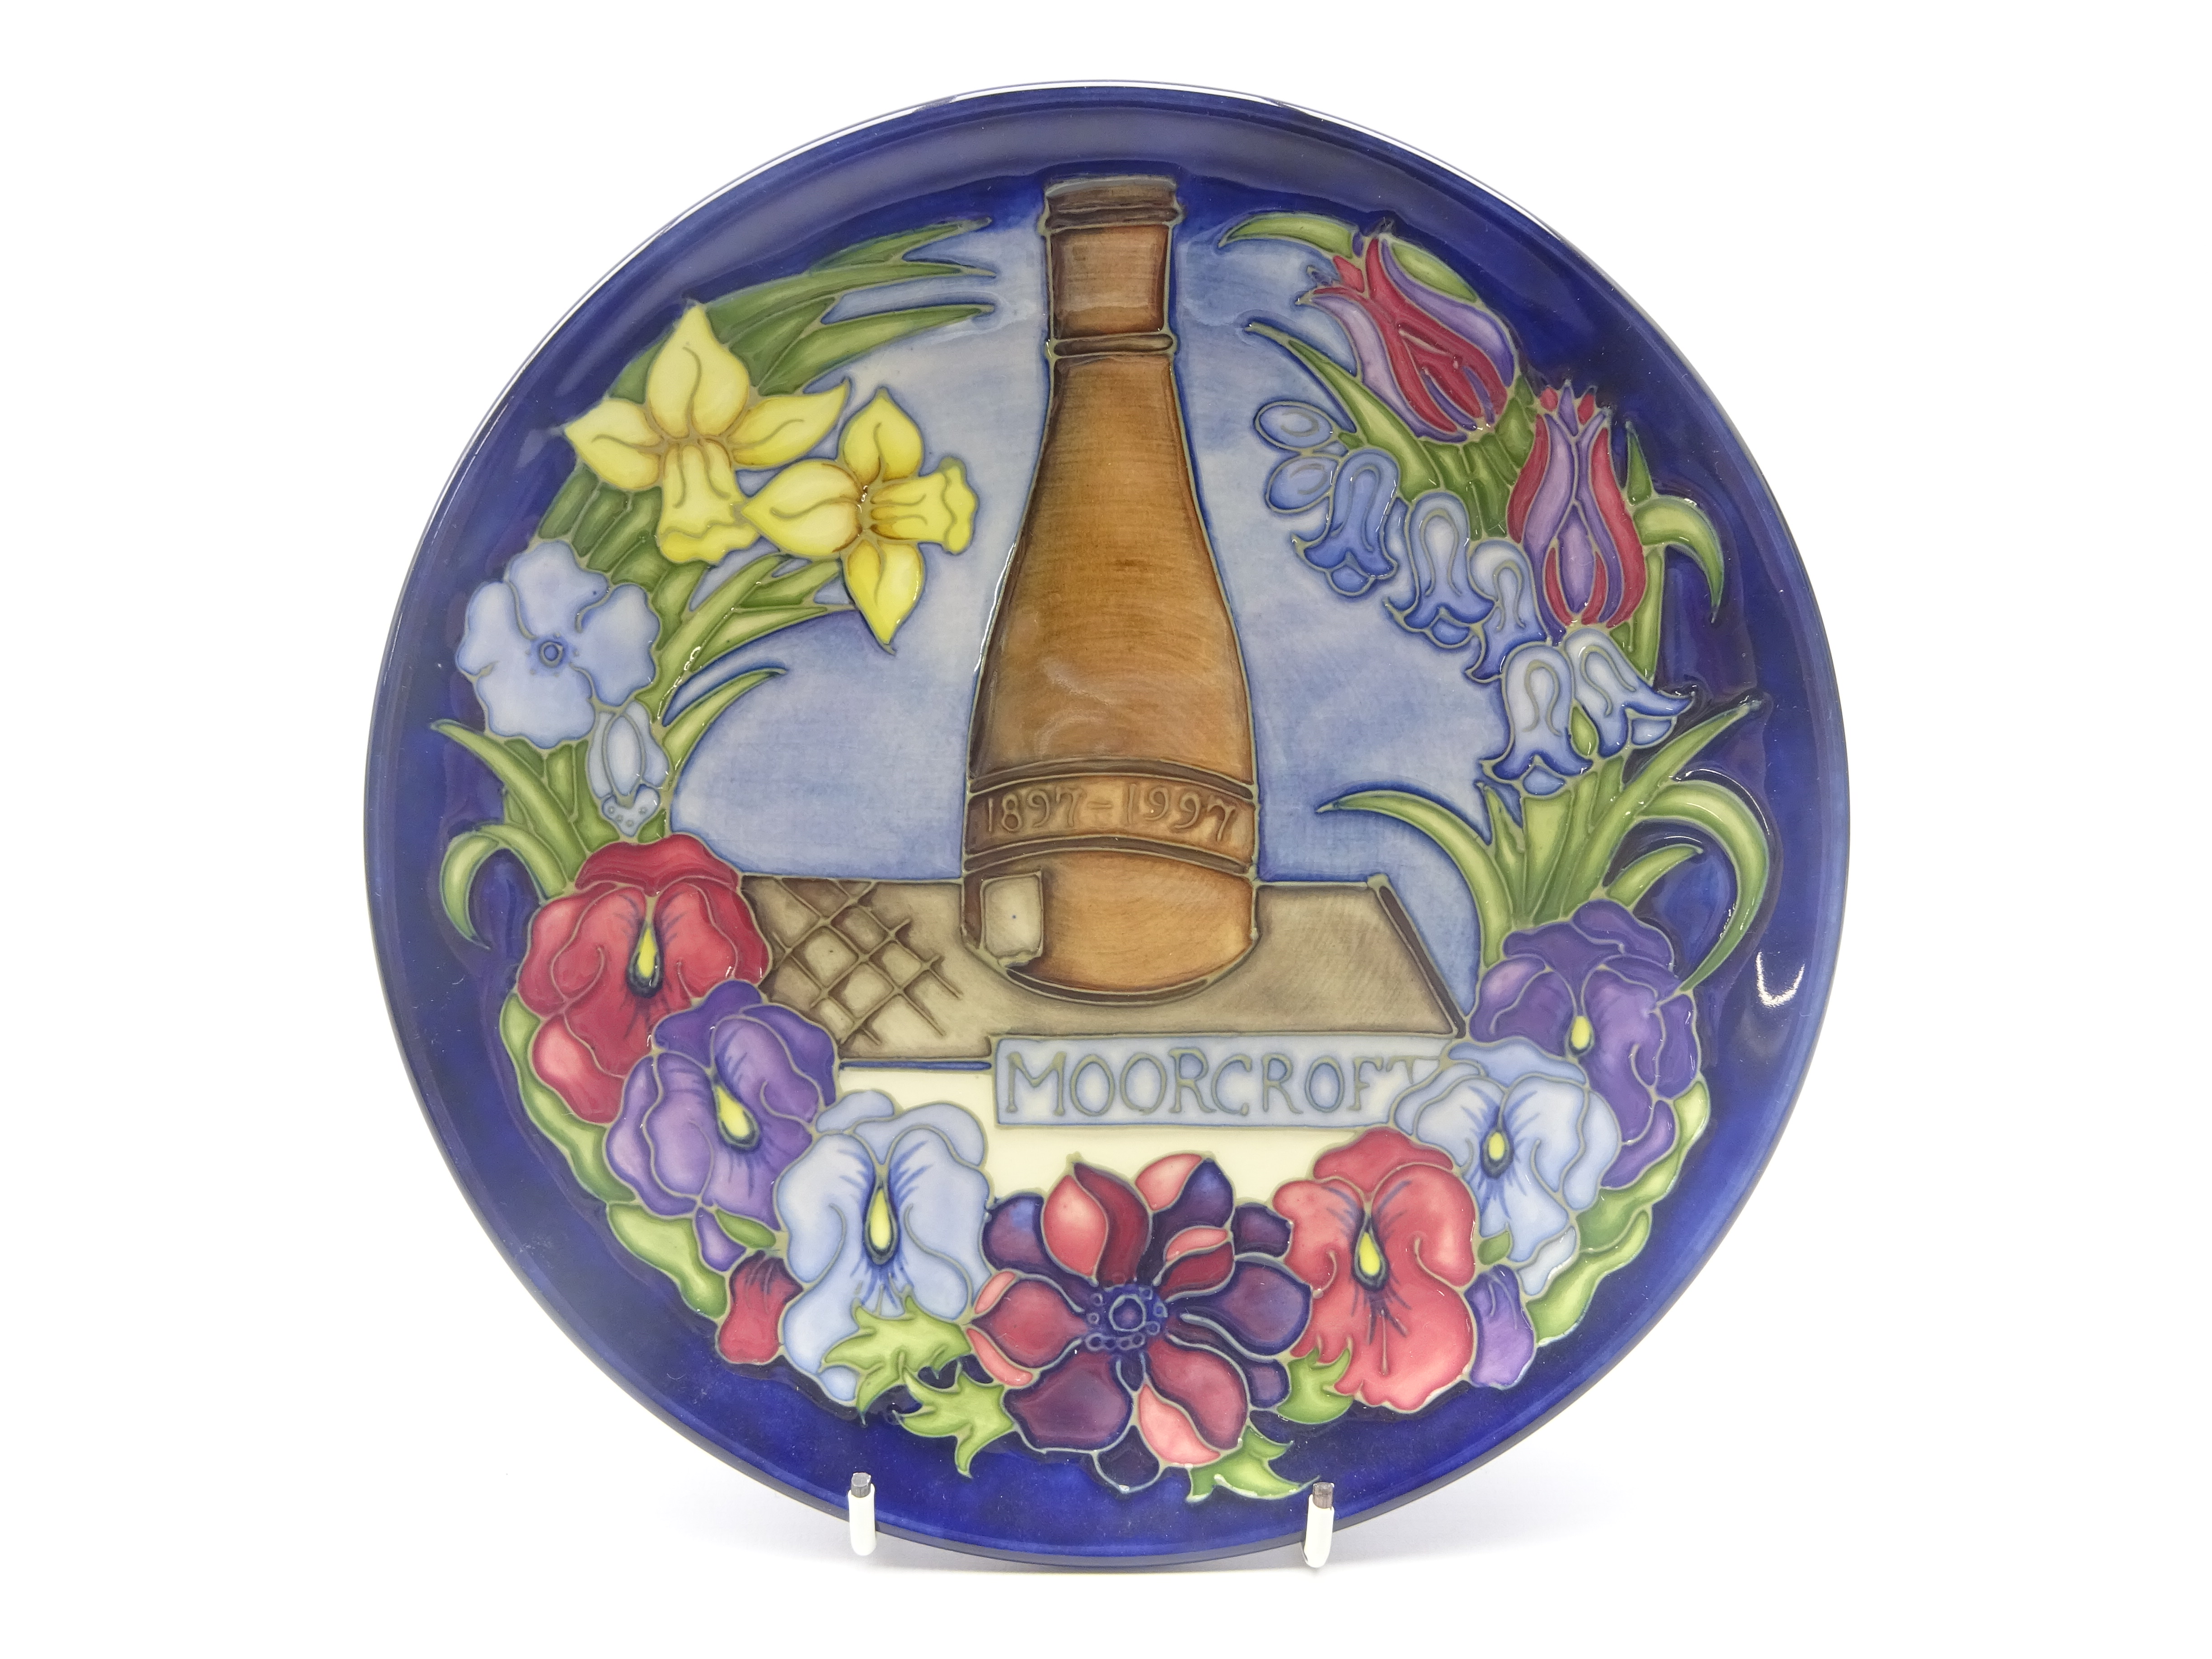 Moorcroft limited edition Centennial Plate 1897-1997 designed by Rachel Bishop, signed W.